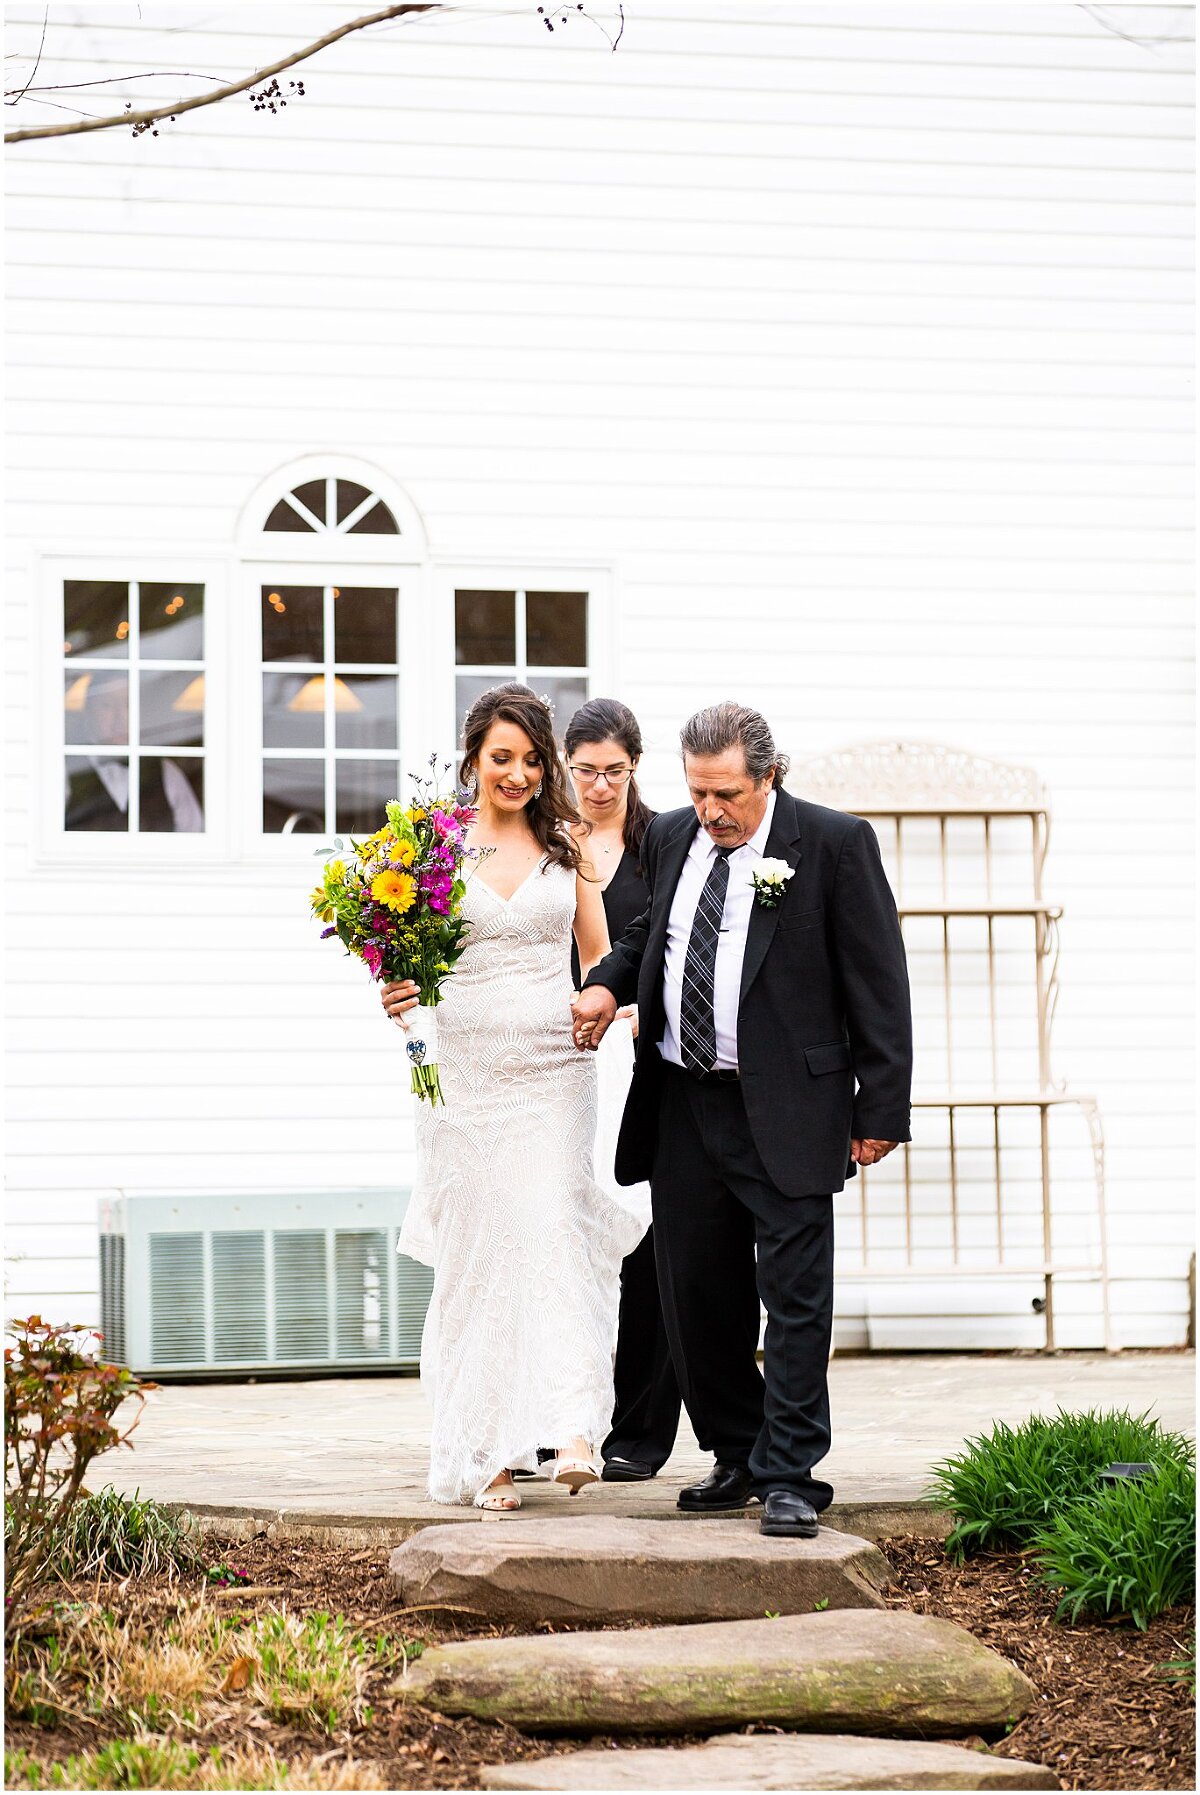 Jeff and Tammy’s SPRING WEDDING was filled with so many special moments from their families! It took place at the Harvest House at Lost Creek Winery. view the full wedding, click here:https://bethanievetter.com/the-harvest-house-at-lost-creek-winery-wedding-leesburg-virginia-tammy-jeff Photographed by Bethanie Vetter Photography LLC. #harvesthouse #theharvesthouseatlostcreek #winerywedding #virginiawedding #springwedding #aprilwedding #weddingphotos #weddingphotography